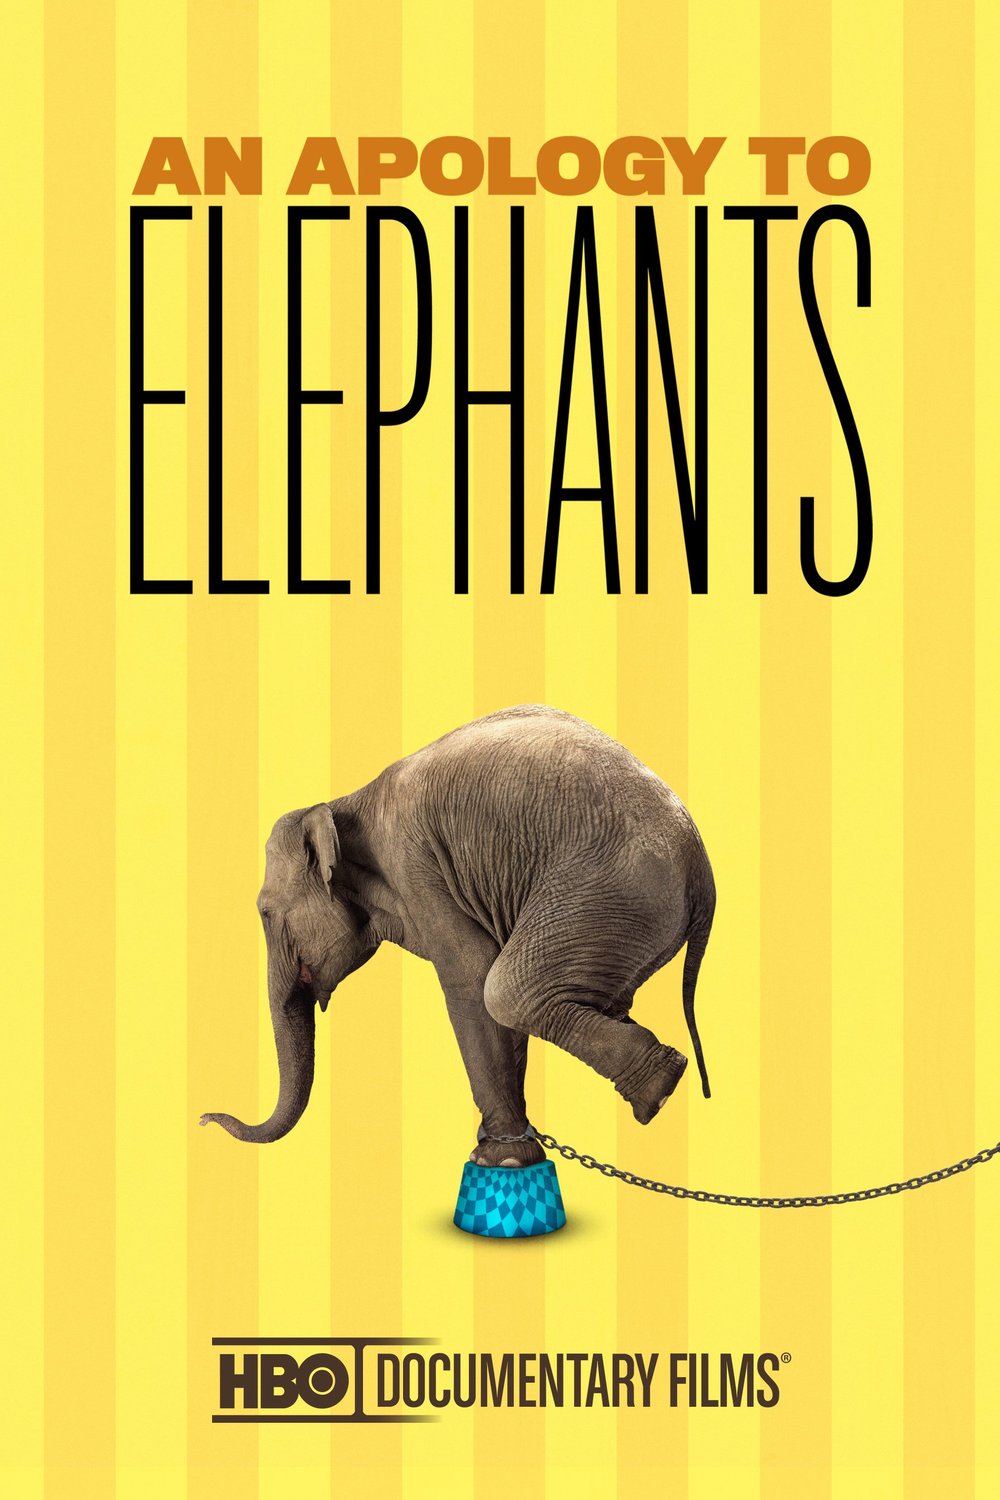 Poster of the movie An Apology to Elephants